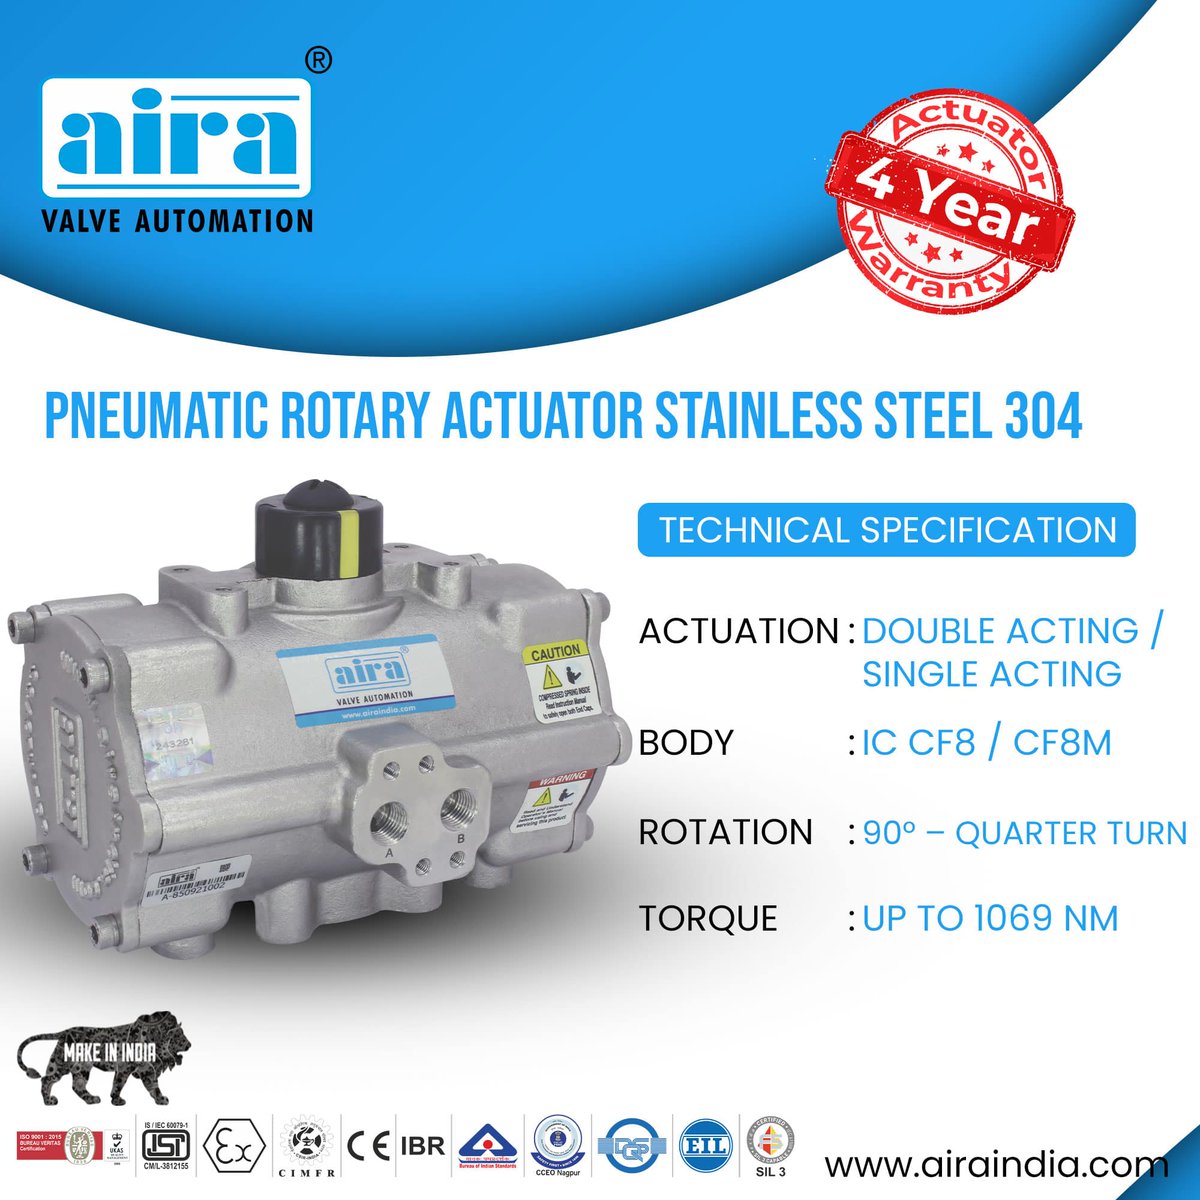 Investing in quality: Stainless steel pneumatic actuators offer a cost-effective solution for demanding applications. 💡🛠️

#AiraEuro #PneumaticActuator #Actuators #QualityInvestment  #Trending #TrendingNow #ExplorePage #Manufacturer #Oem #Technology #MakeInIndia #G20 #India